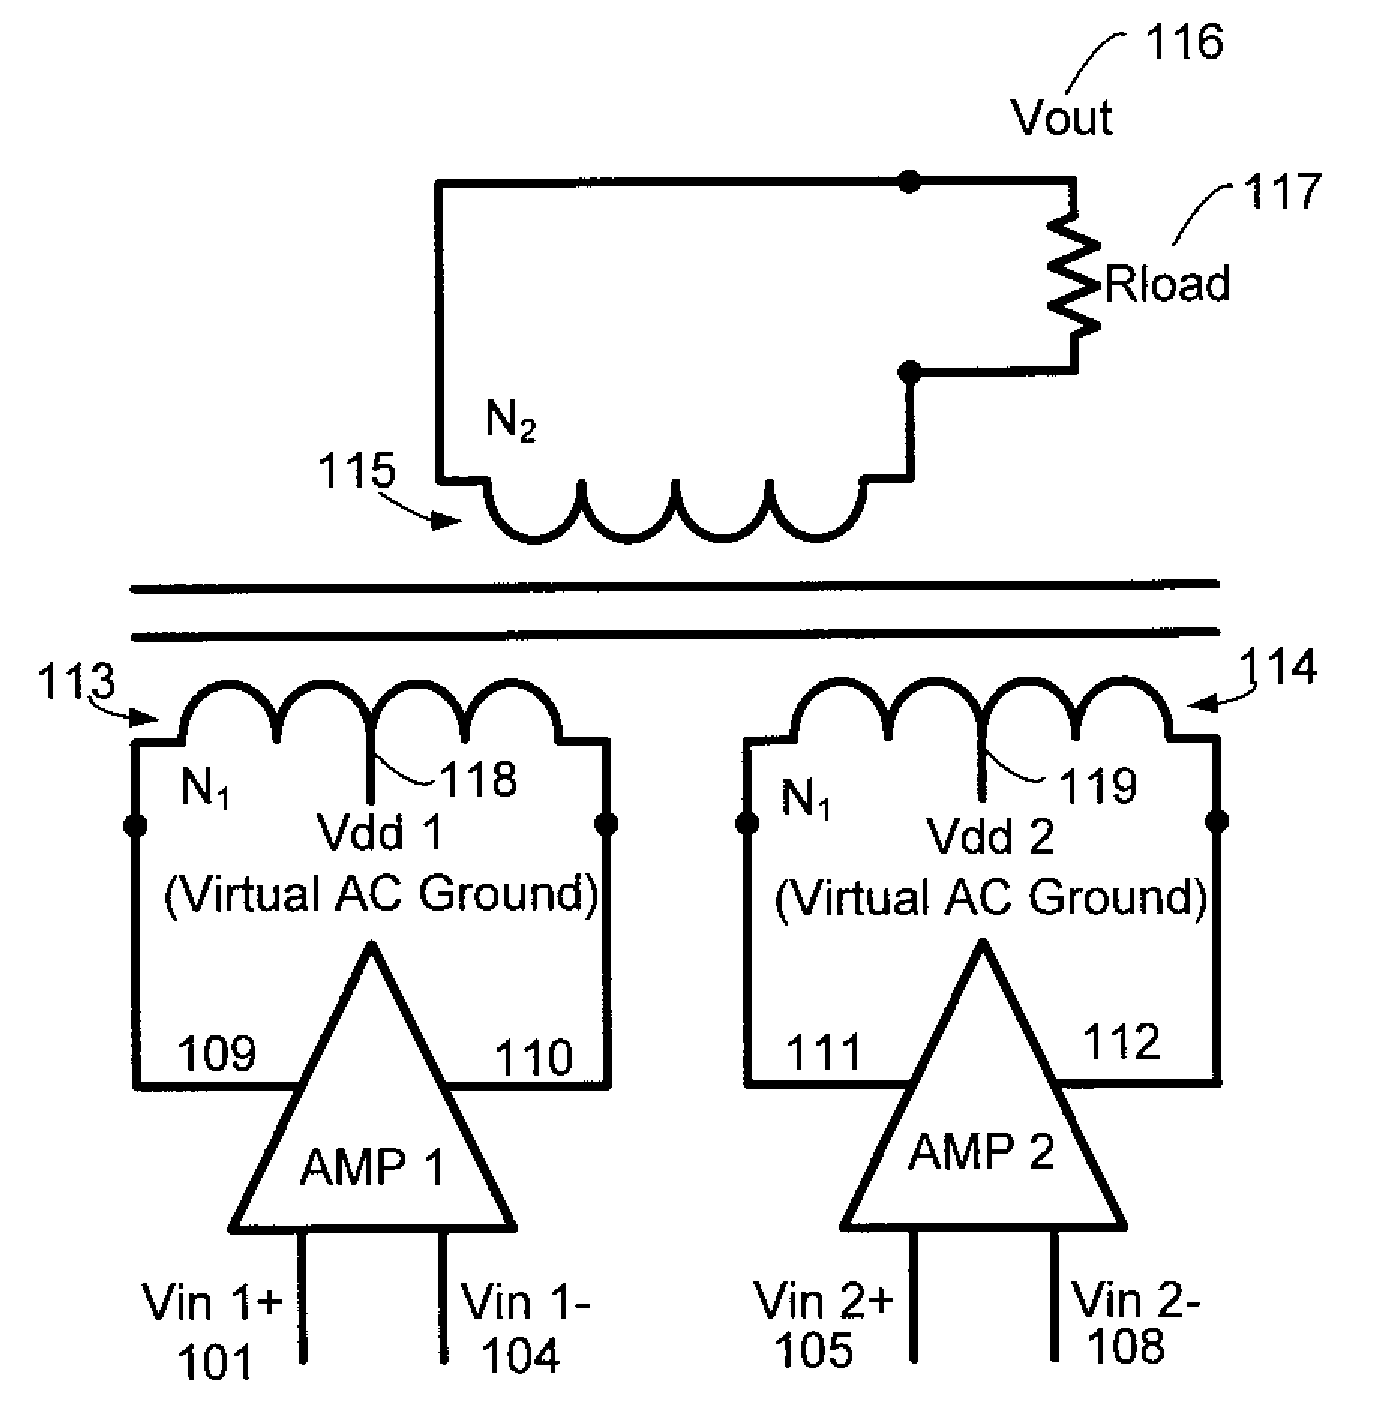 Systems and methods for power amplifiers with voltage boosting multi-primary transformers